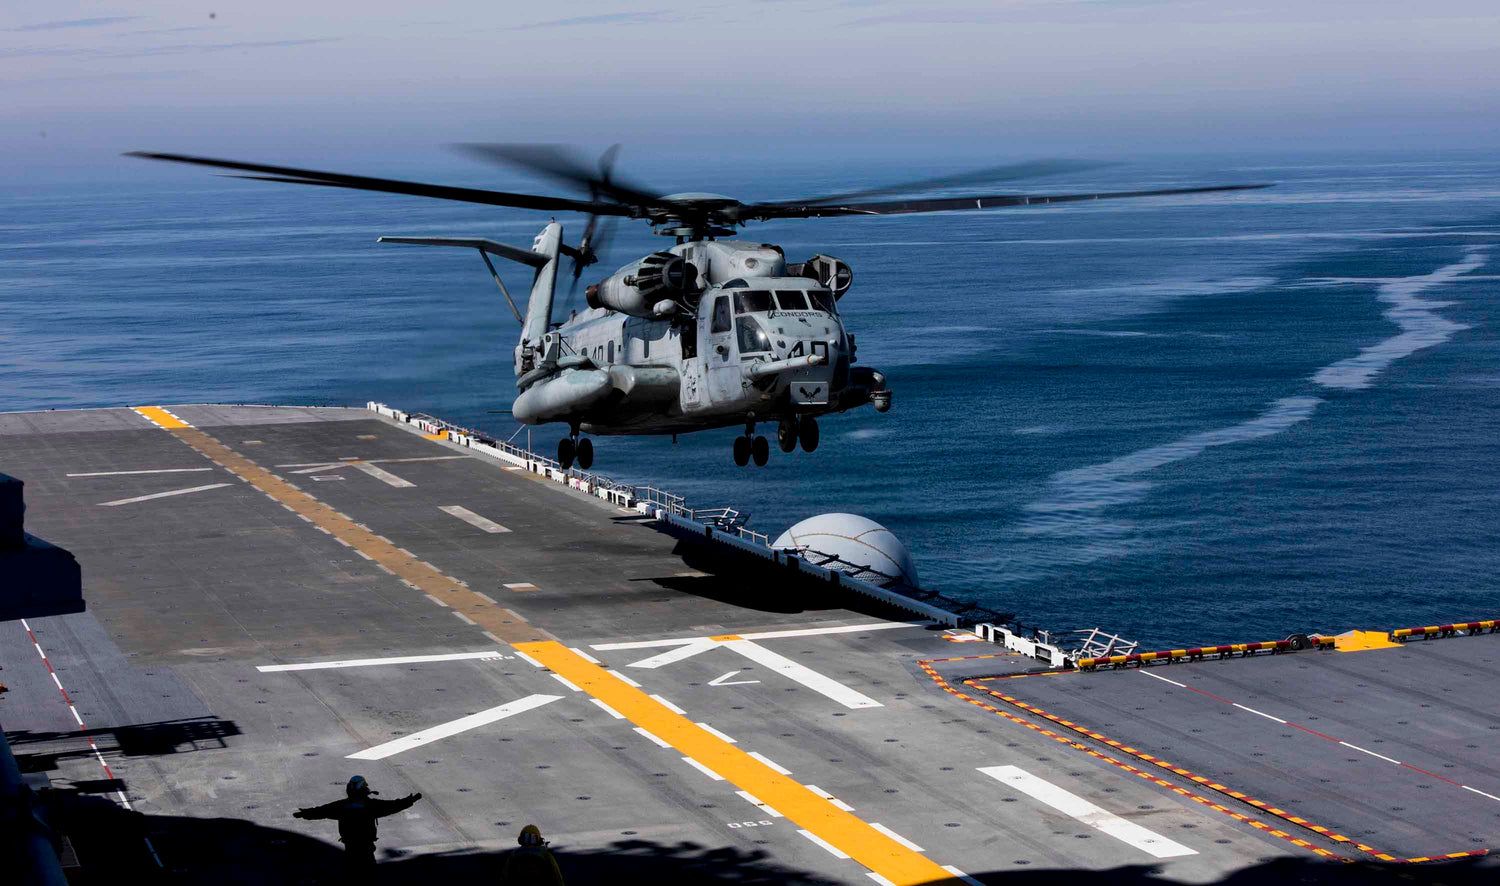 Search in the Storm: The Intense Hunt for the Missing Marines and Their CH-53E Super Stallion